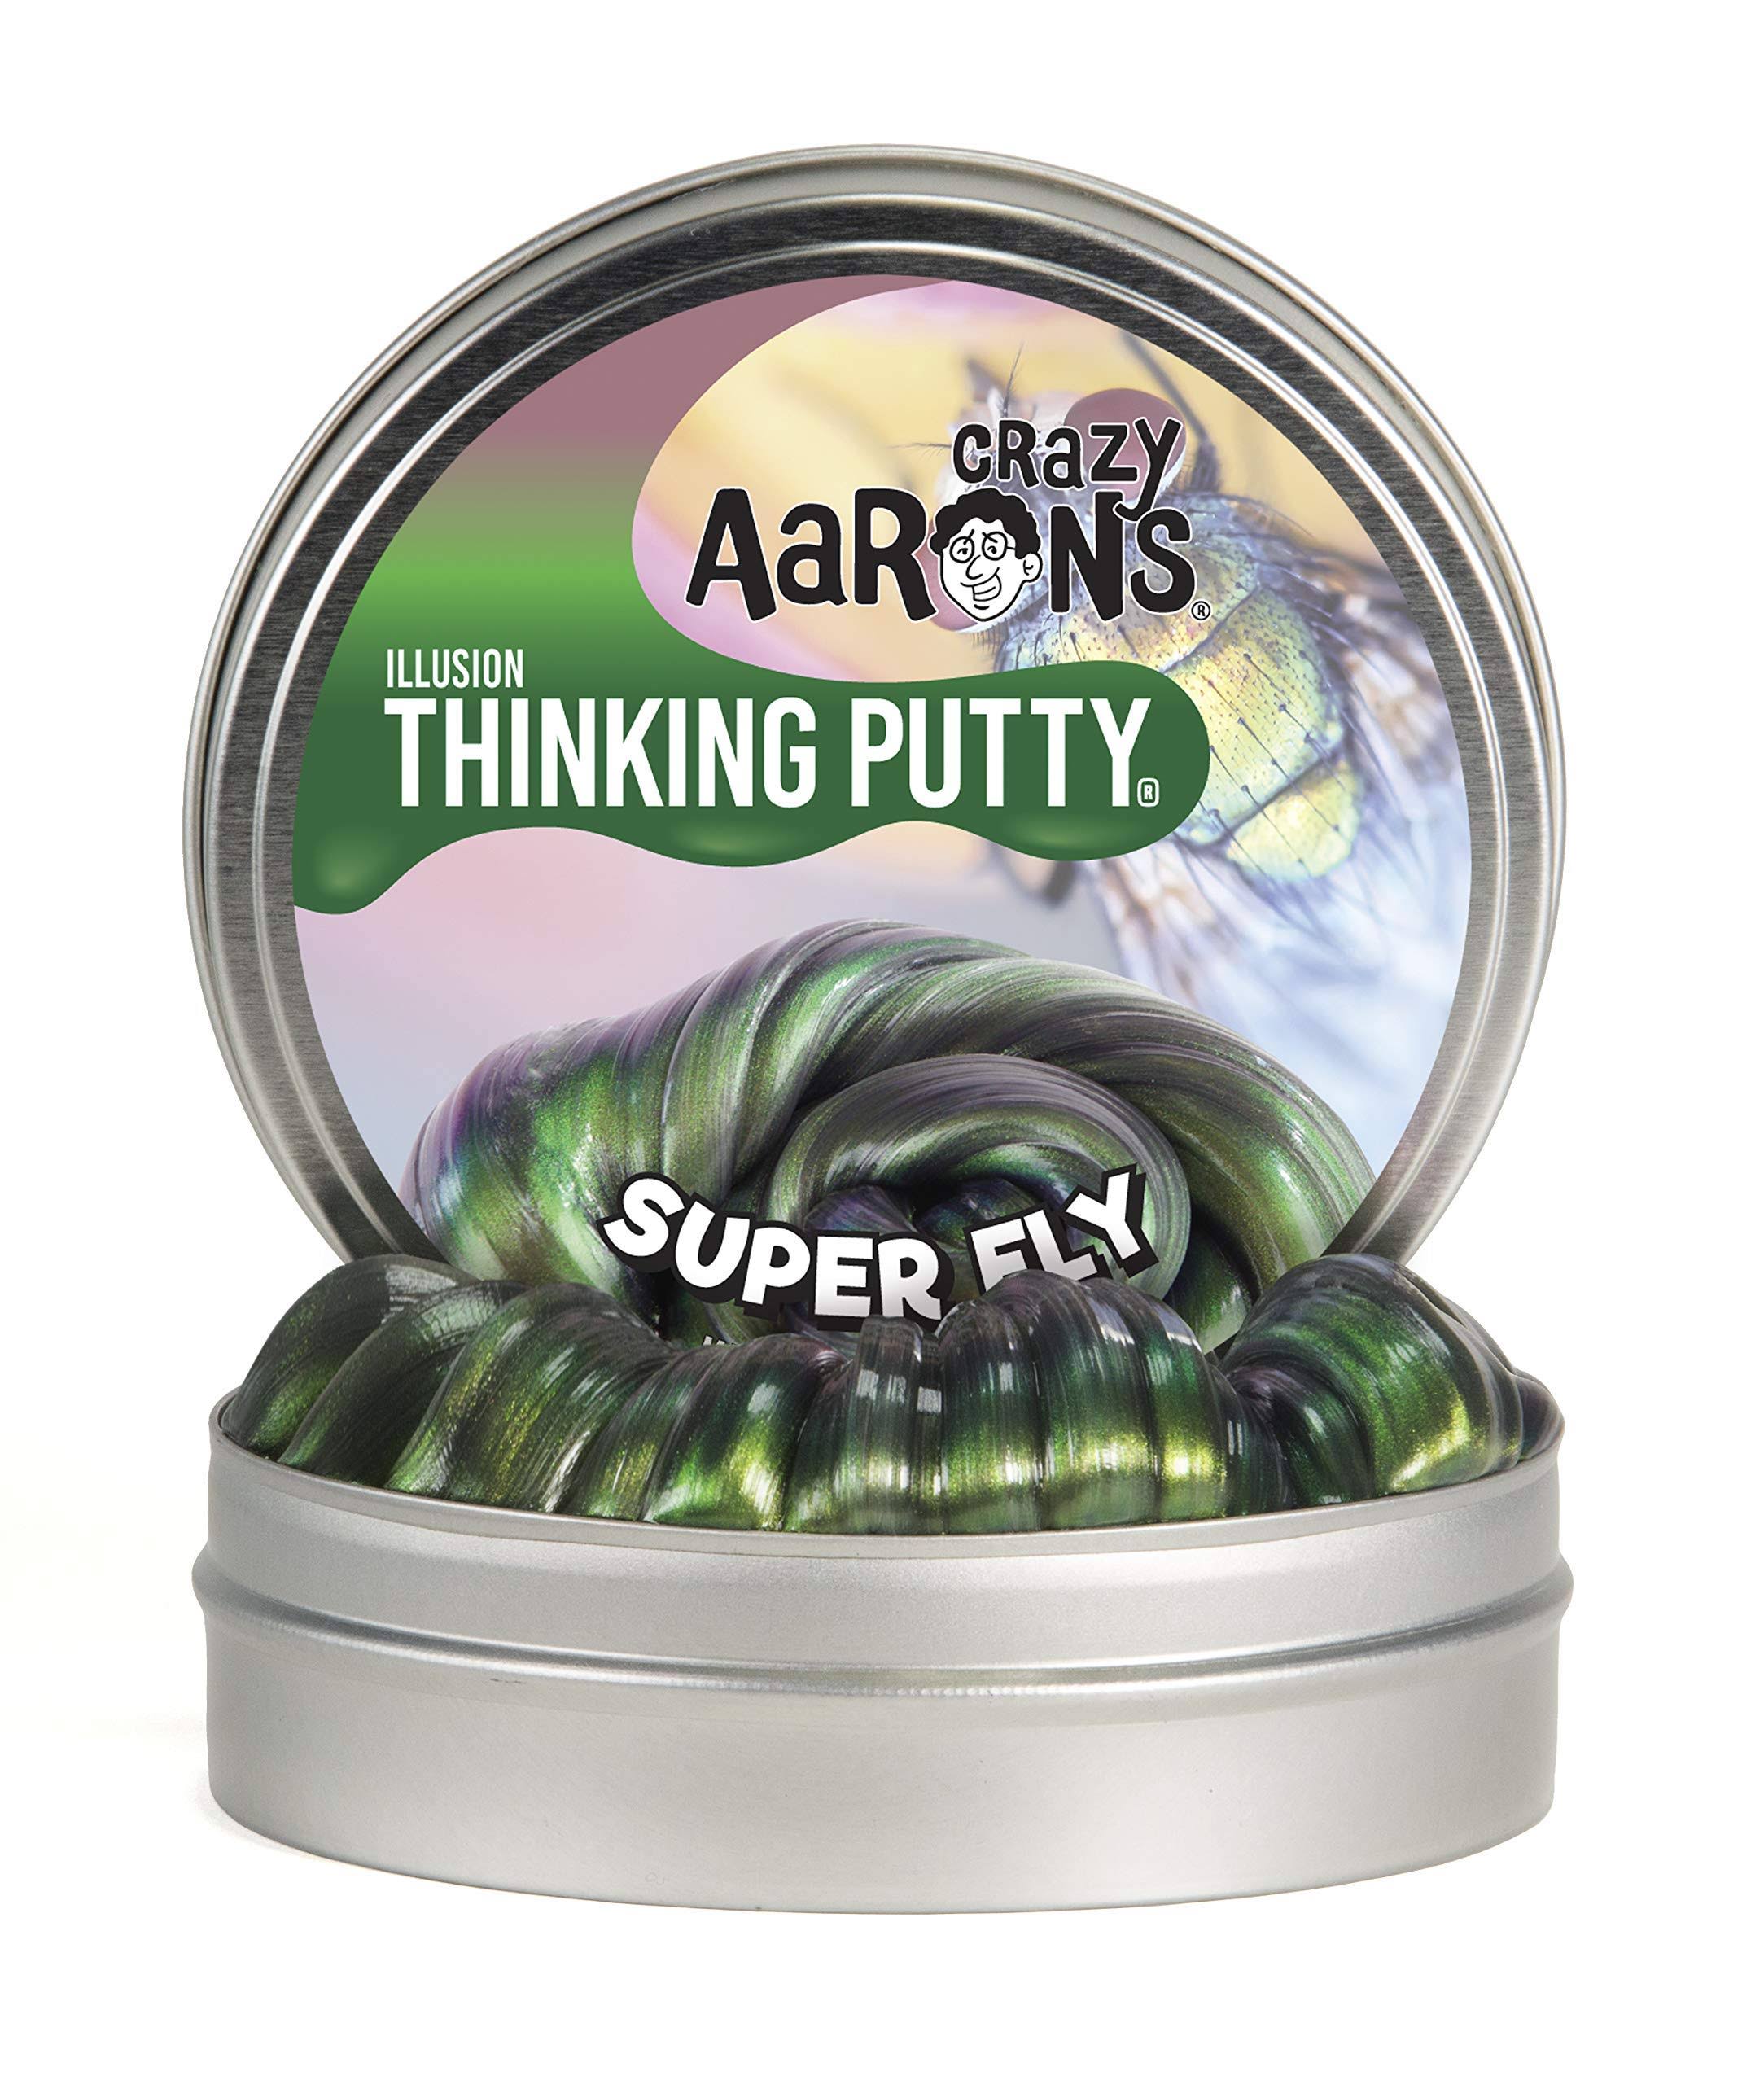 Green Elephant Trading Crazy Aaron's Thinking Putty - SUPER FLY, Illusion, 10cm Tin